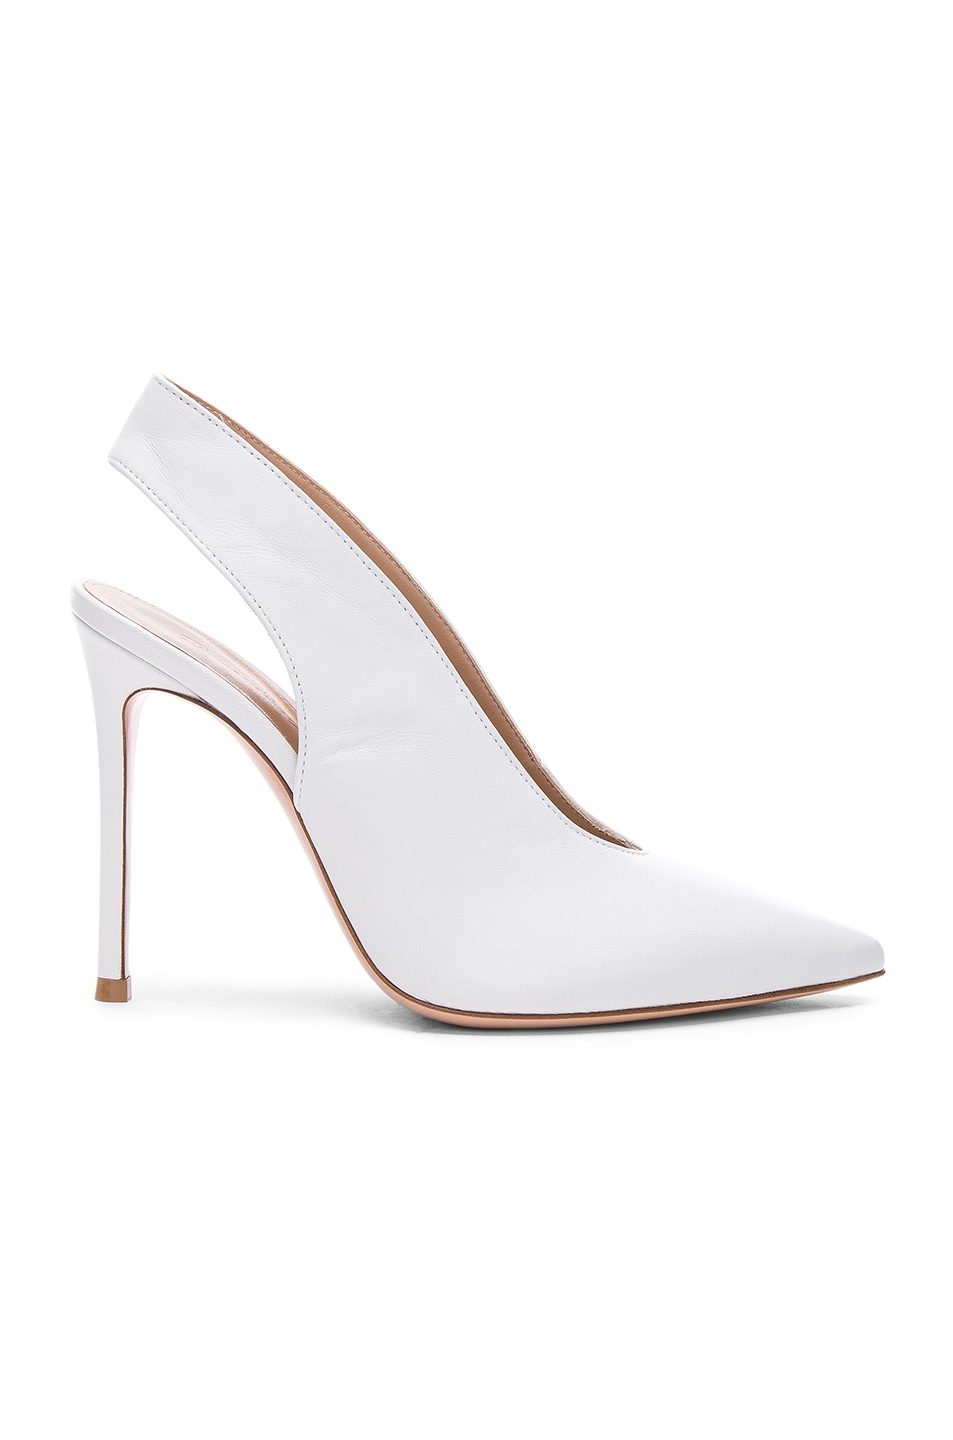 Image 1 of Gianvito Rossi Leather Anna Slingback Pumps in White